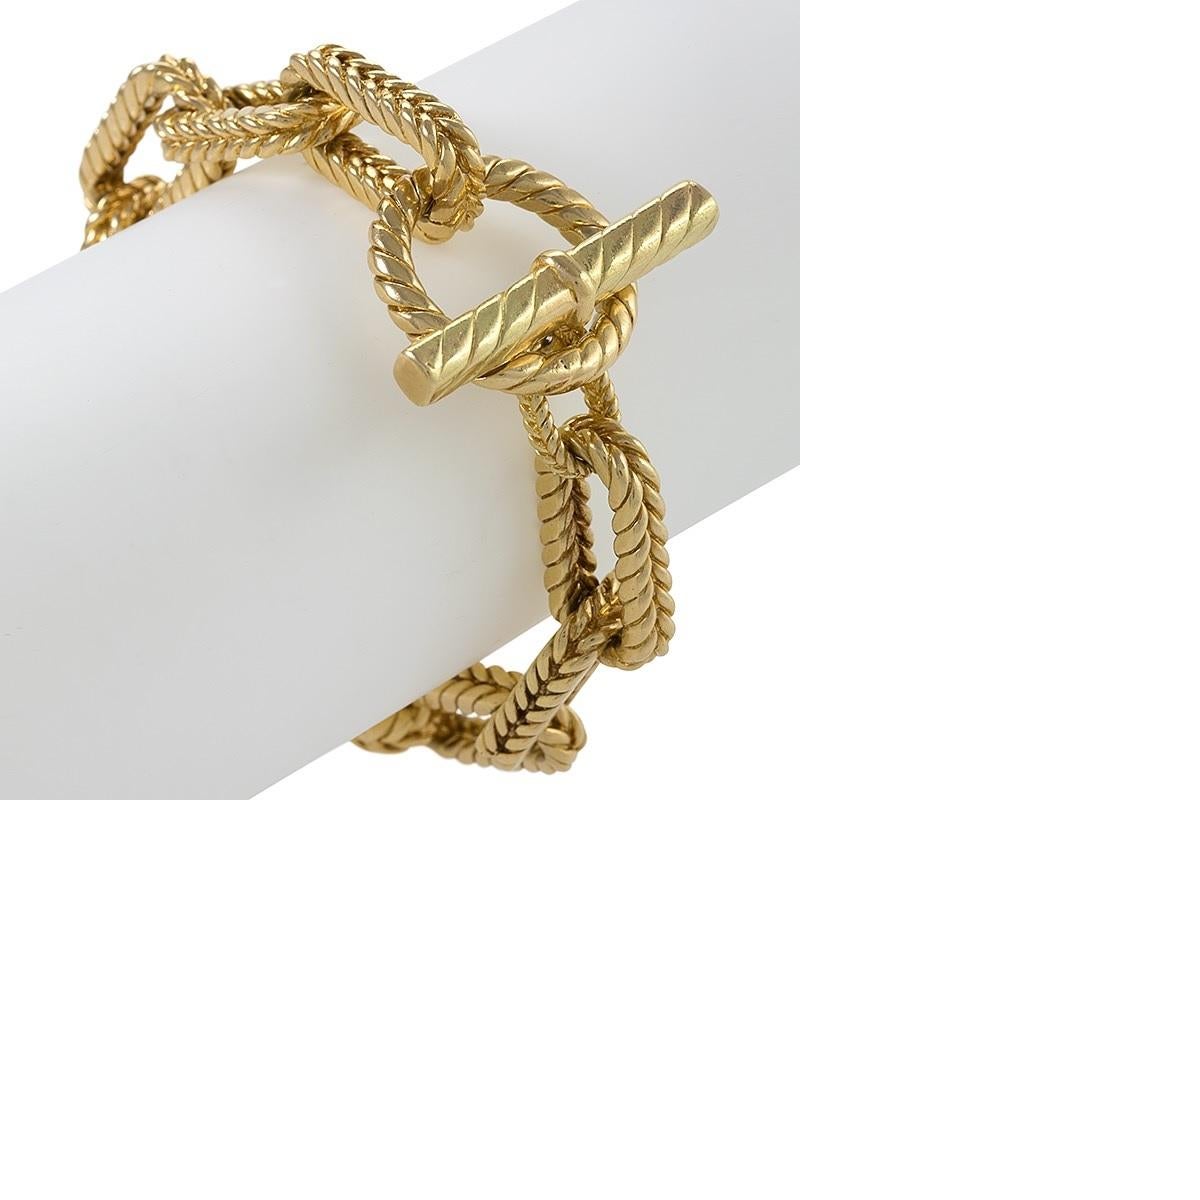 An American 18 karat gold bracelet by Tiffany & Co. The bracelet is comprised of elongated rectangularly-shaped links engraved with a design of braided rope. 
Circa 1970's.

Signed, Tiffany & Co. 750 . 